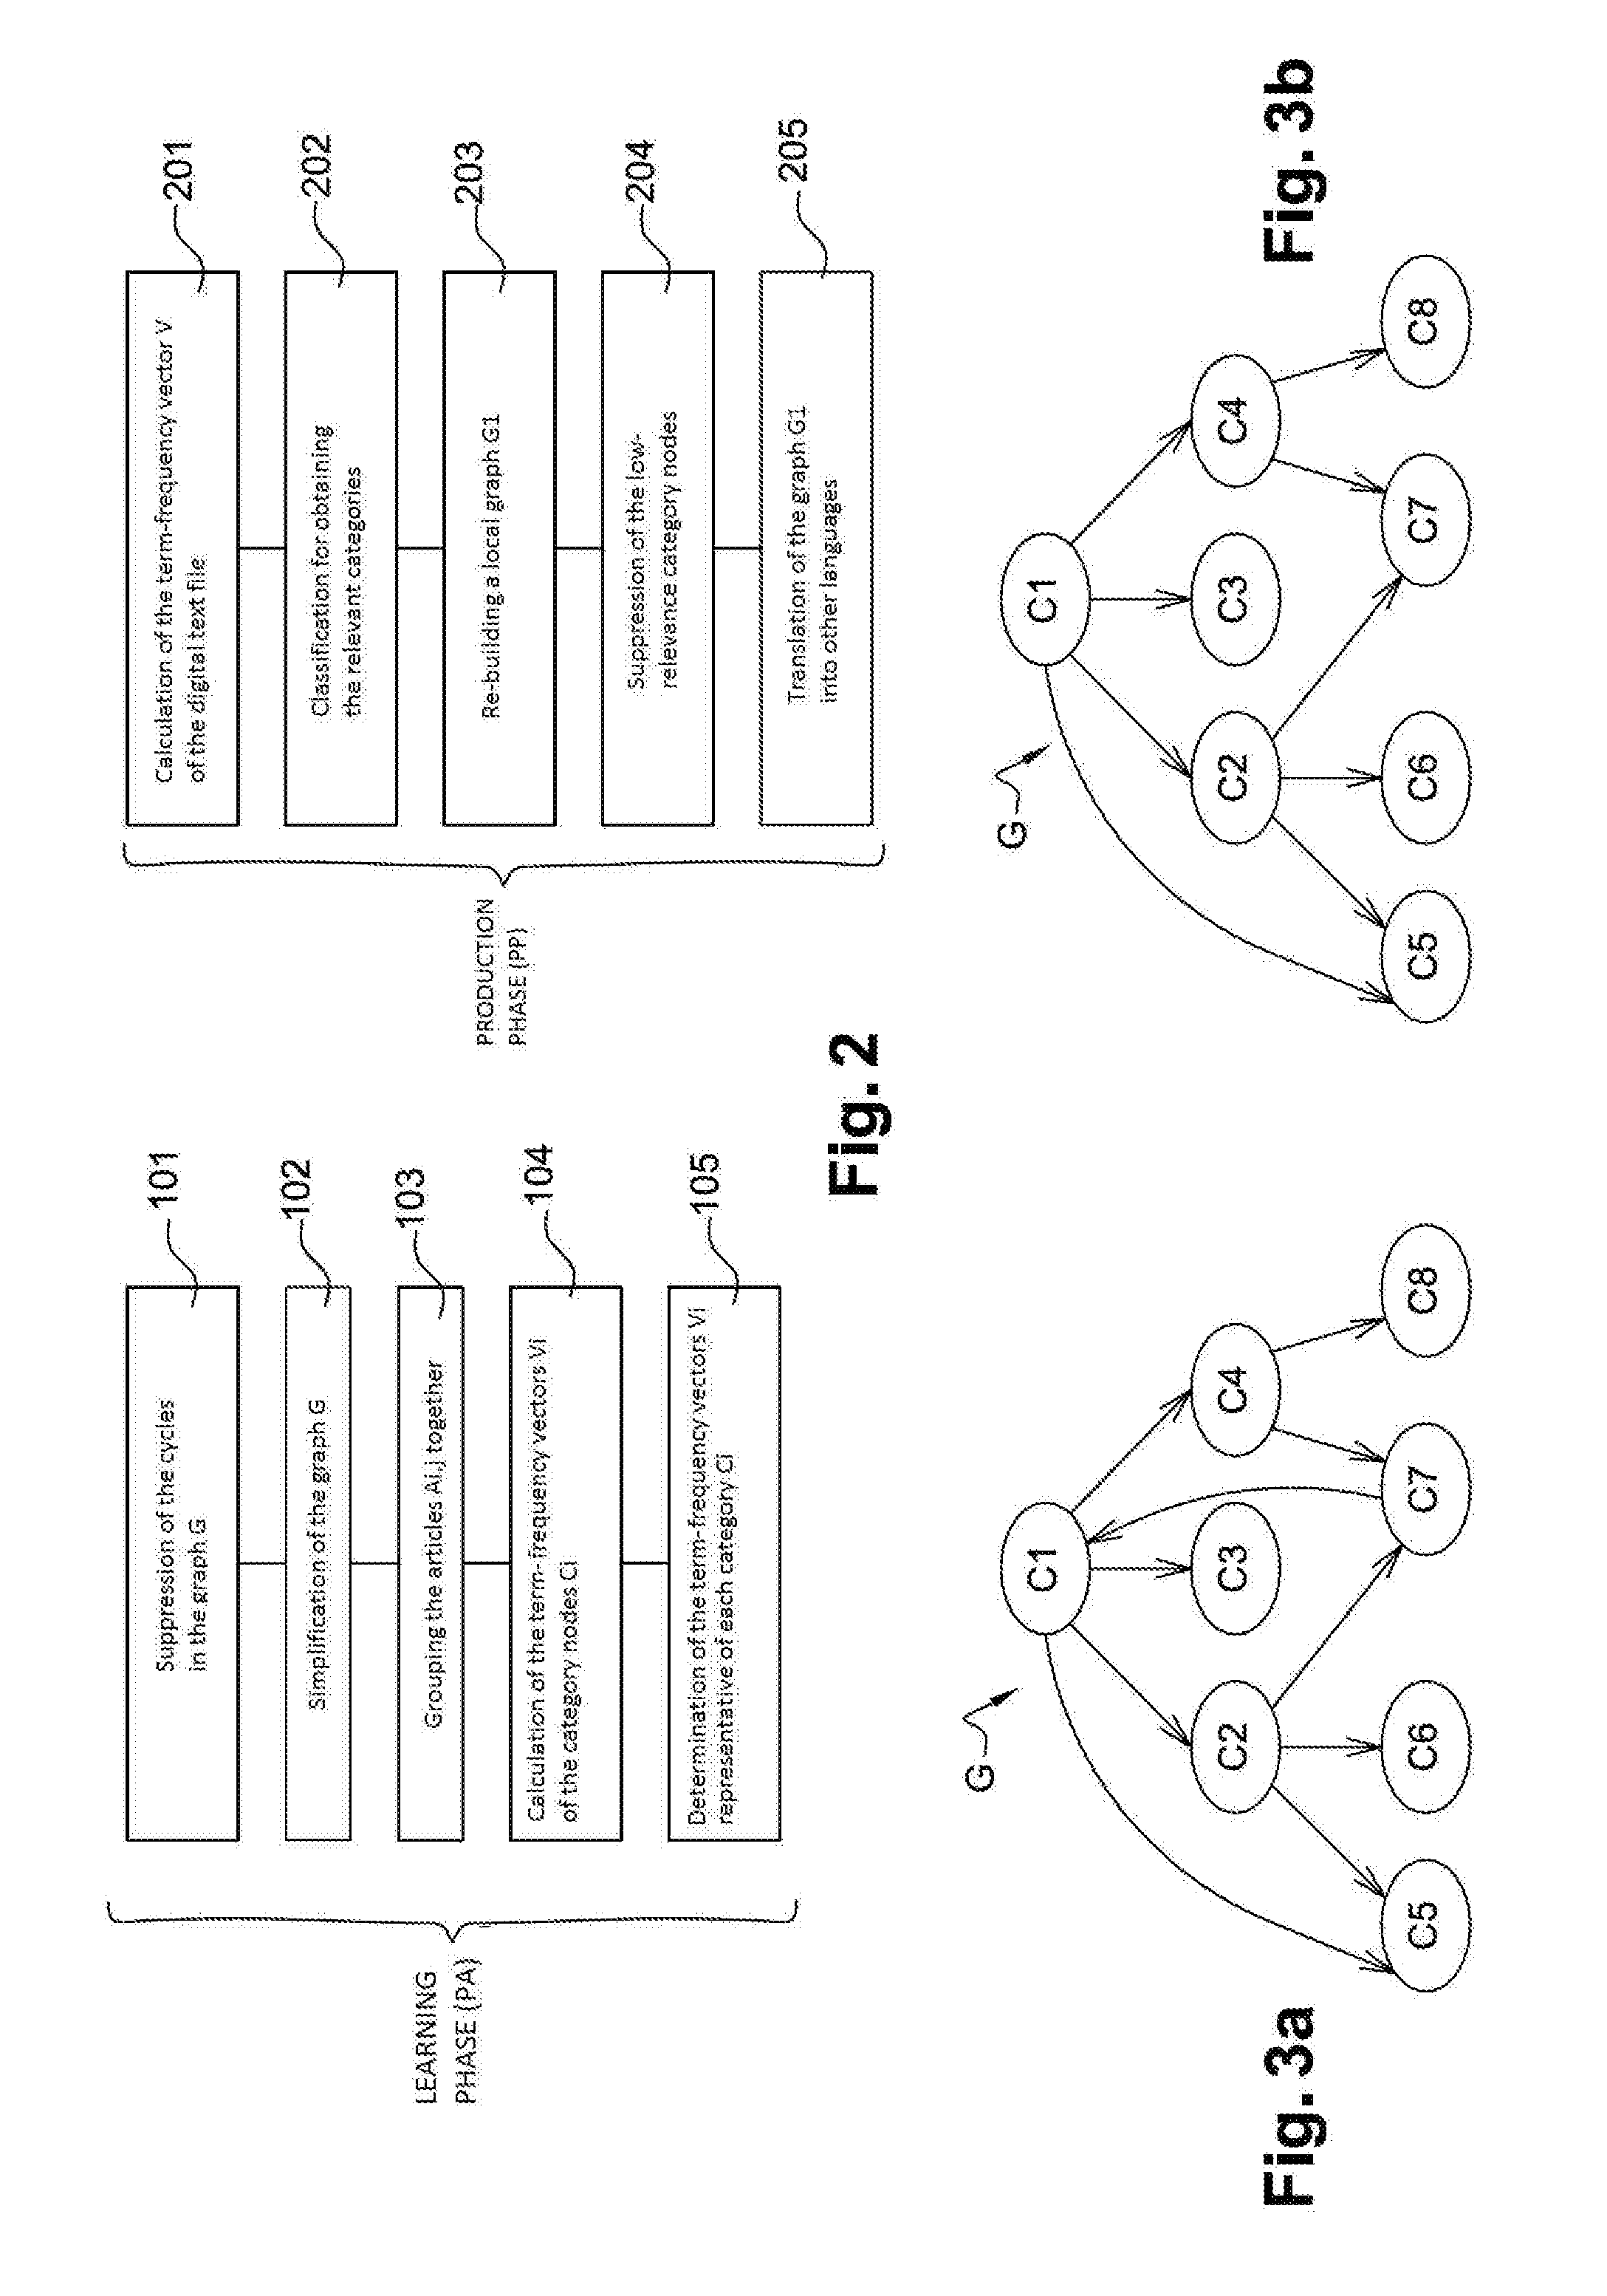 Method for automatic thematic classification of a digital text file